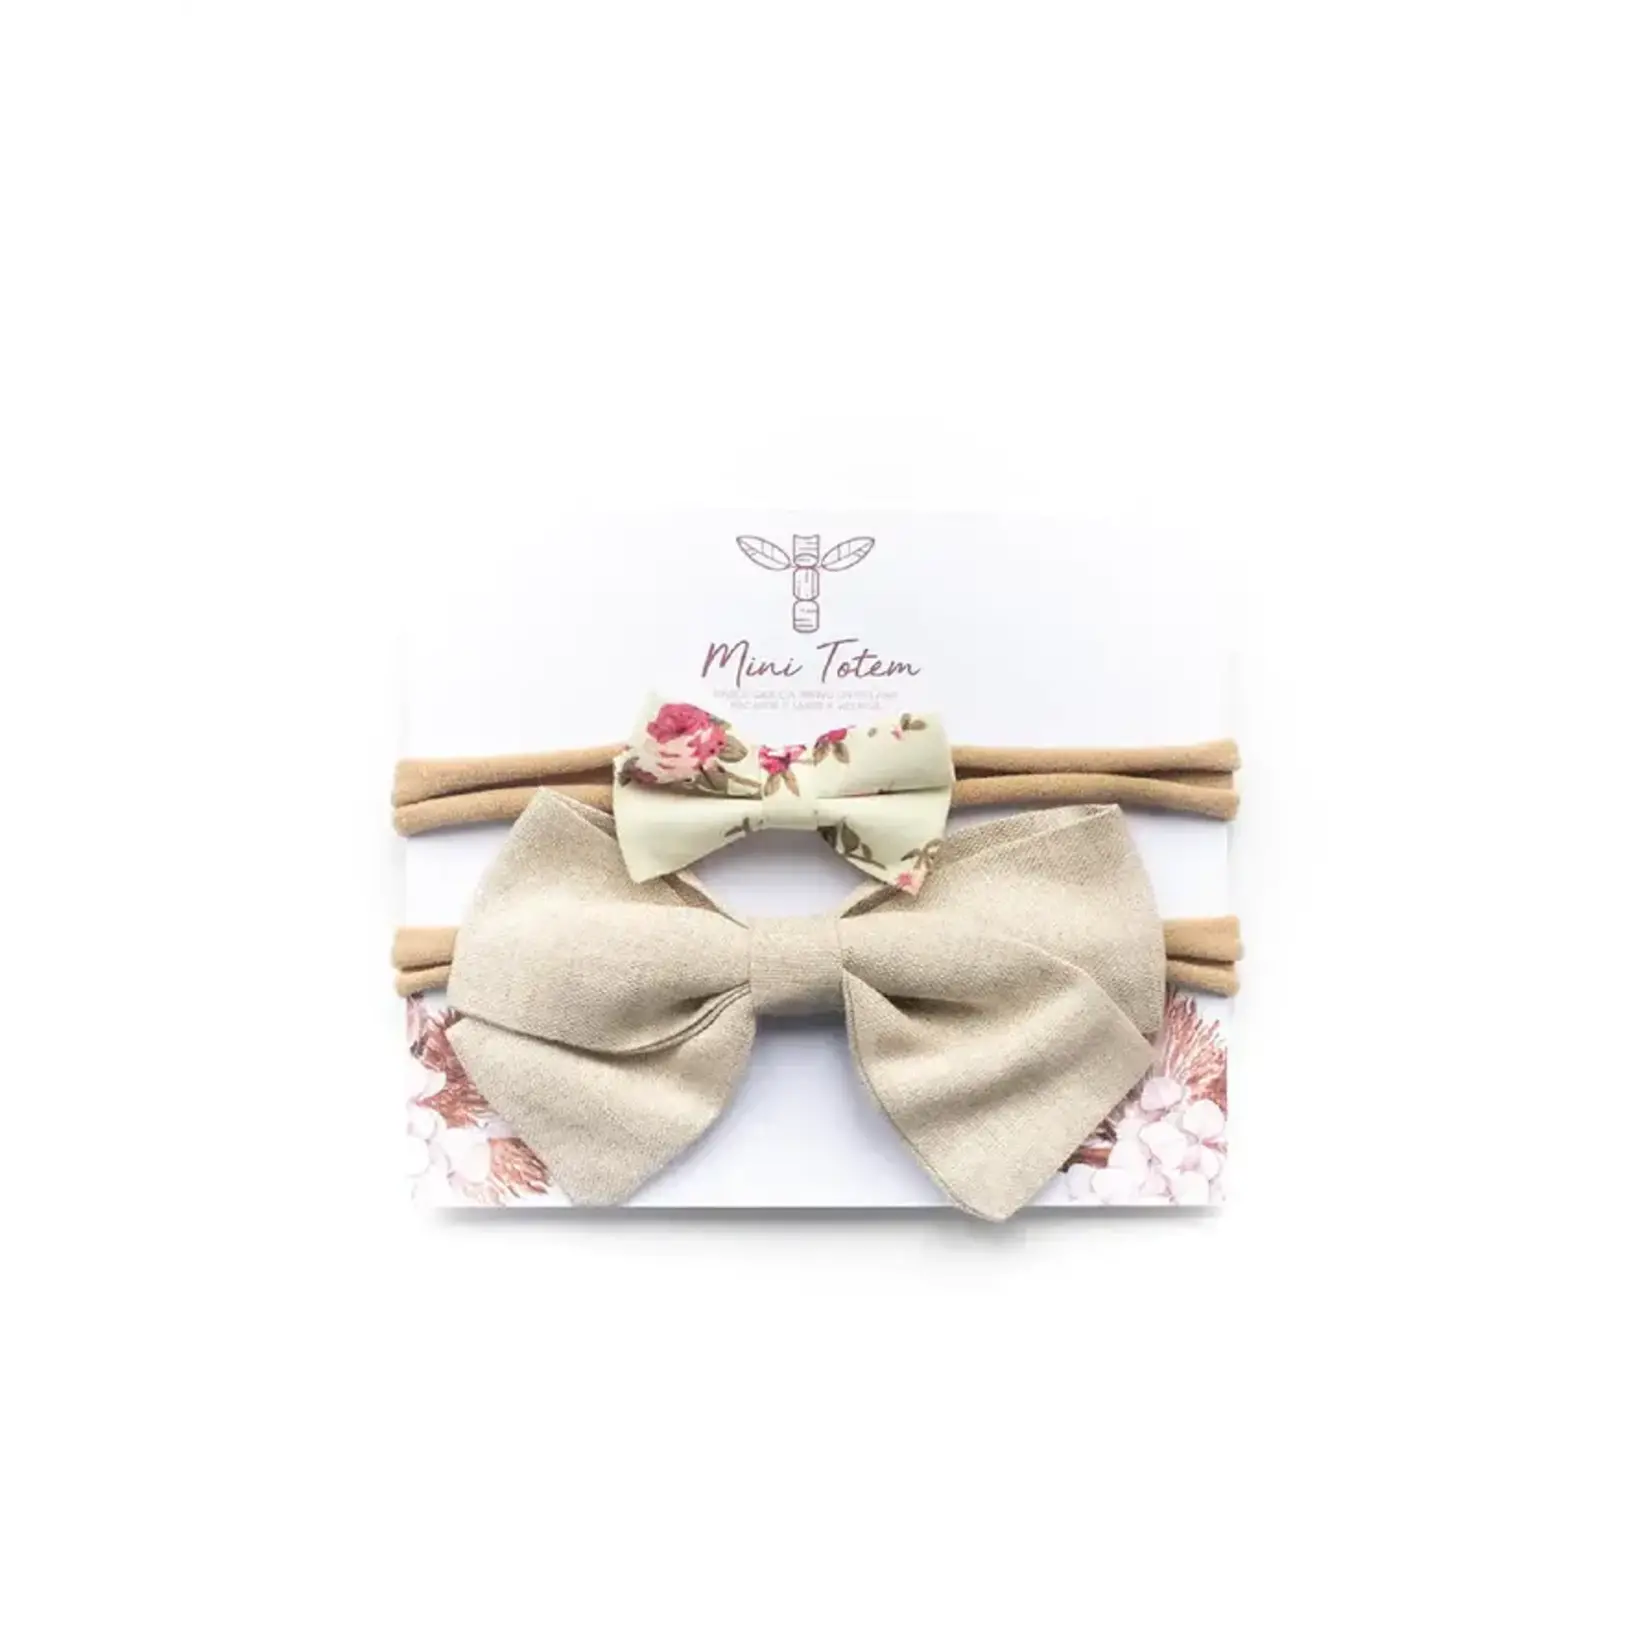 Mini Totem MINI TOTEM - 2 headbands with bows 'Ellarose' - Small floral bow and large taupe bow